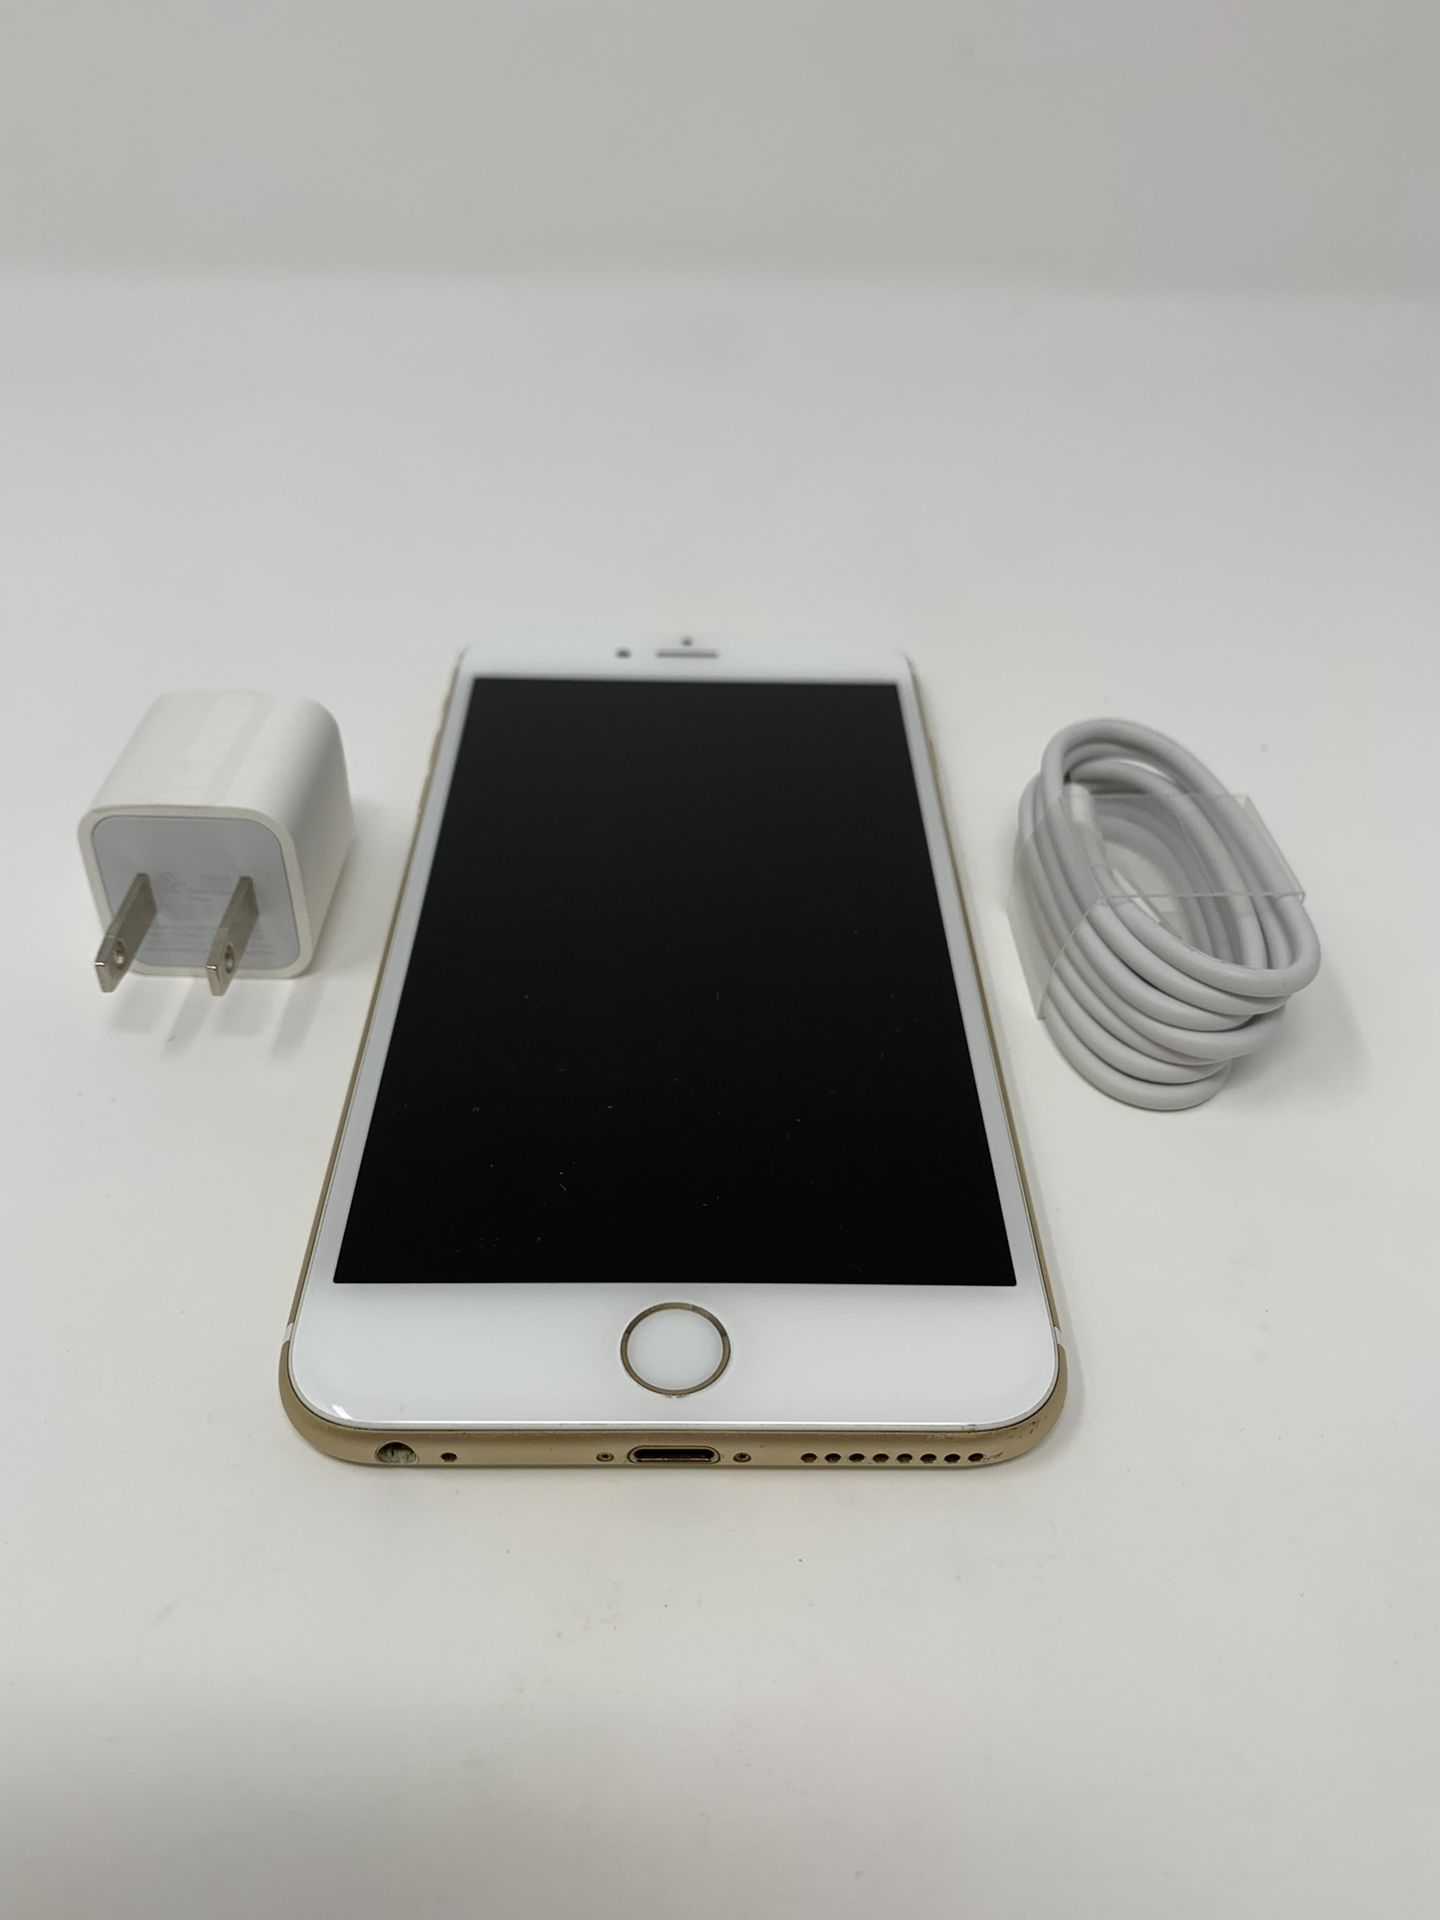 iPhone 6 Plus 16GB Unlocked 90 Day Warranty, Interest Free From Lease to own